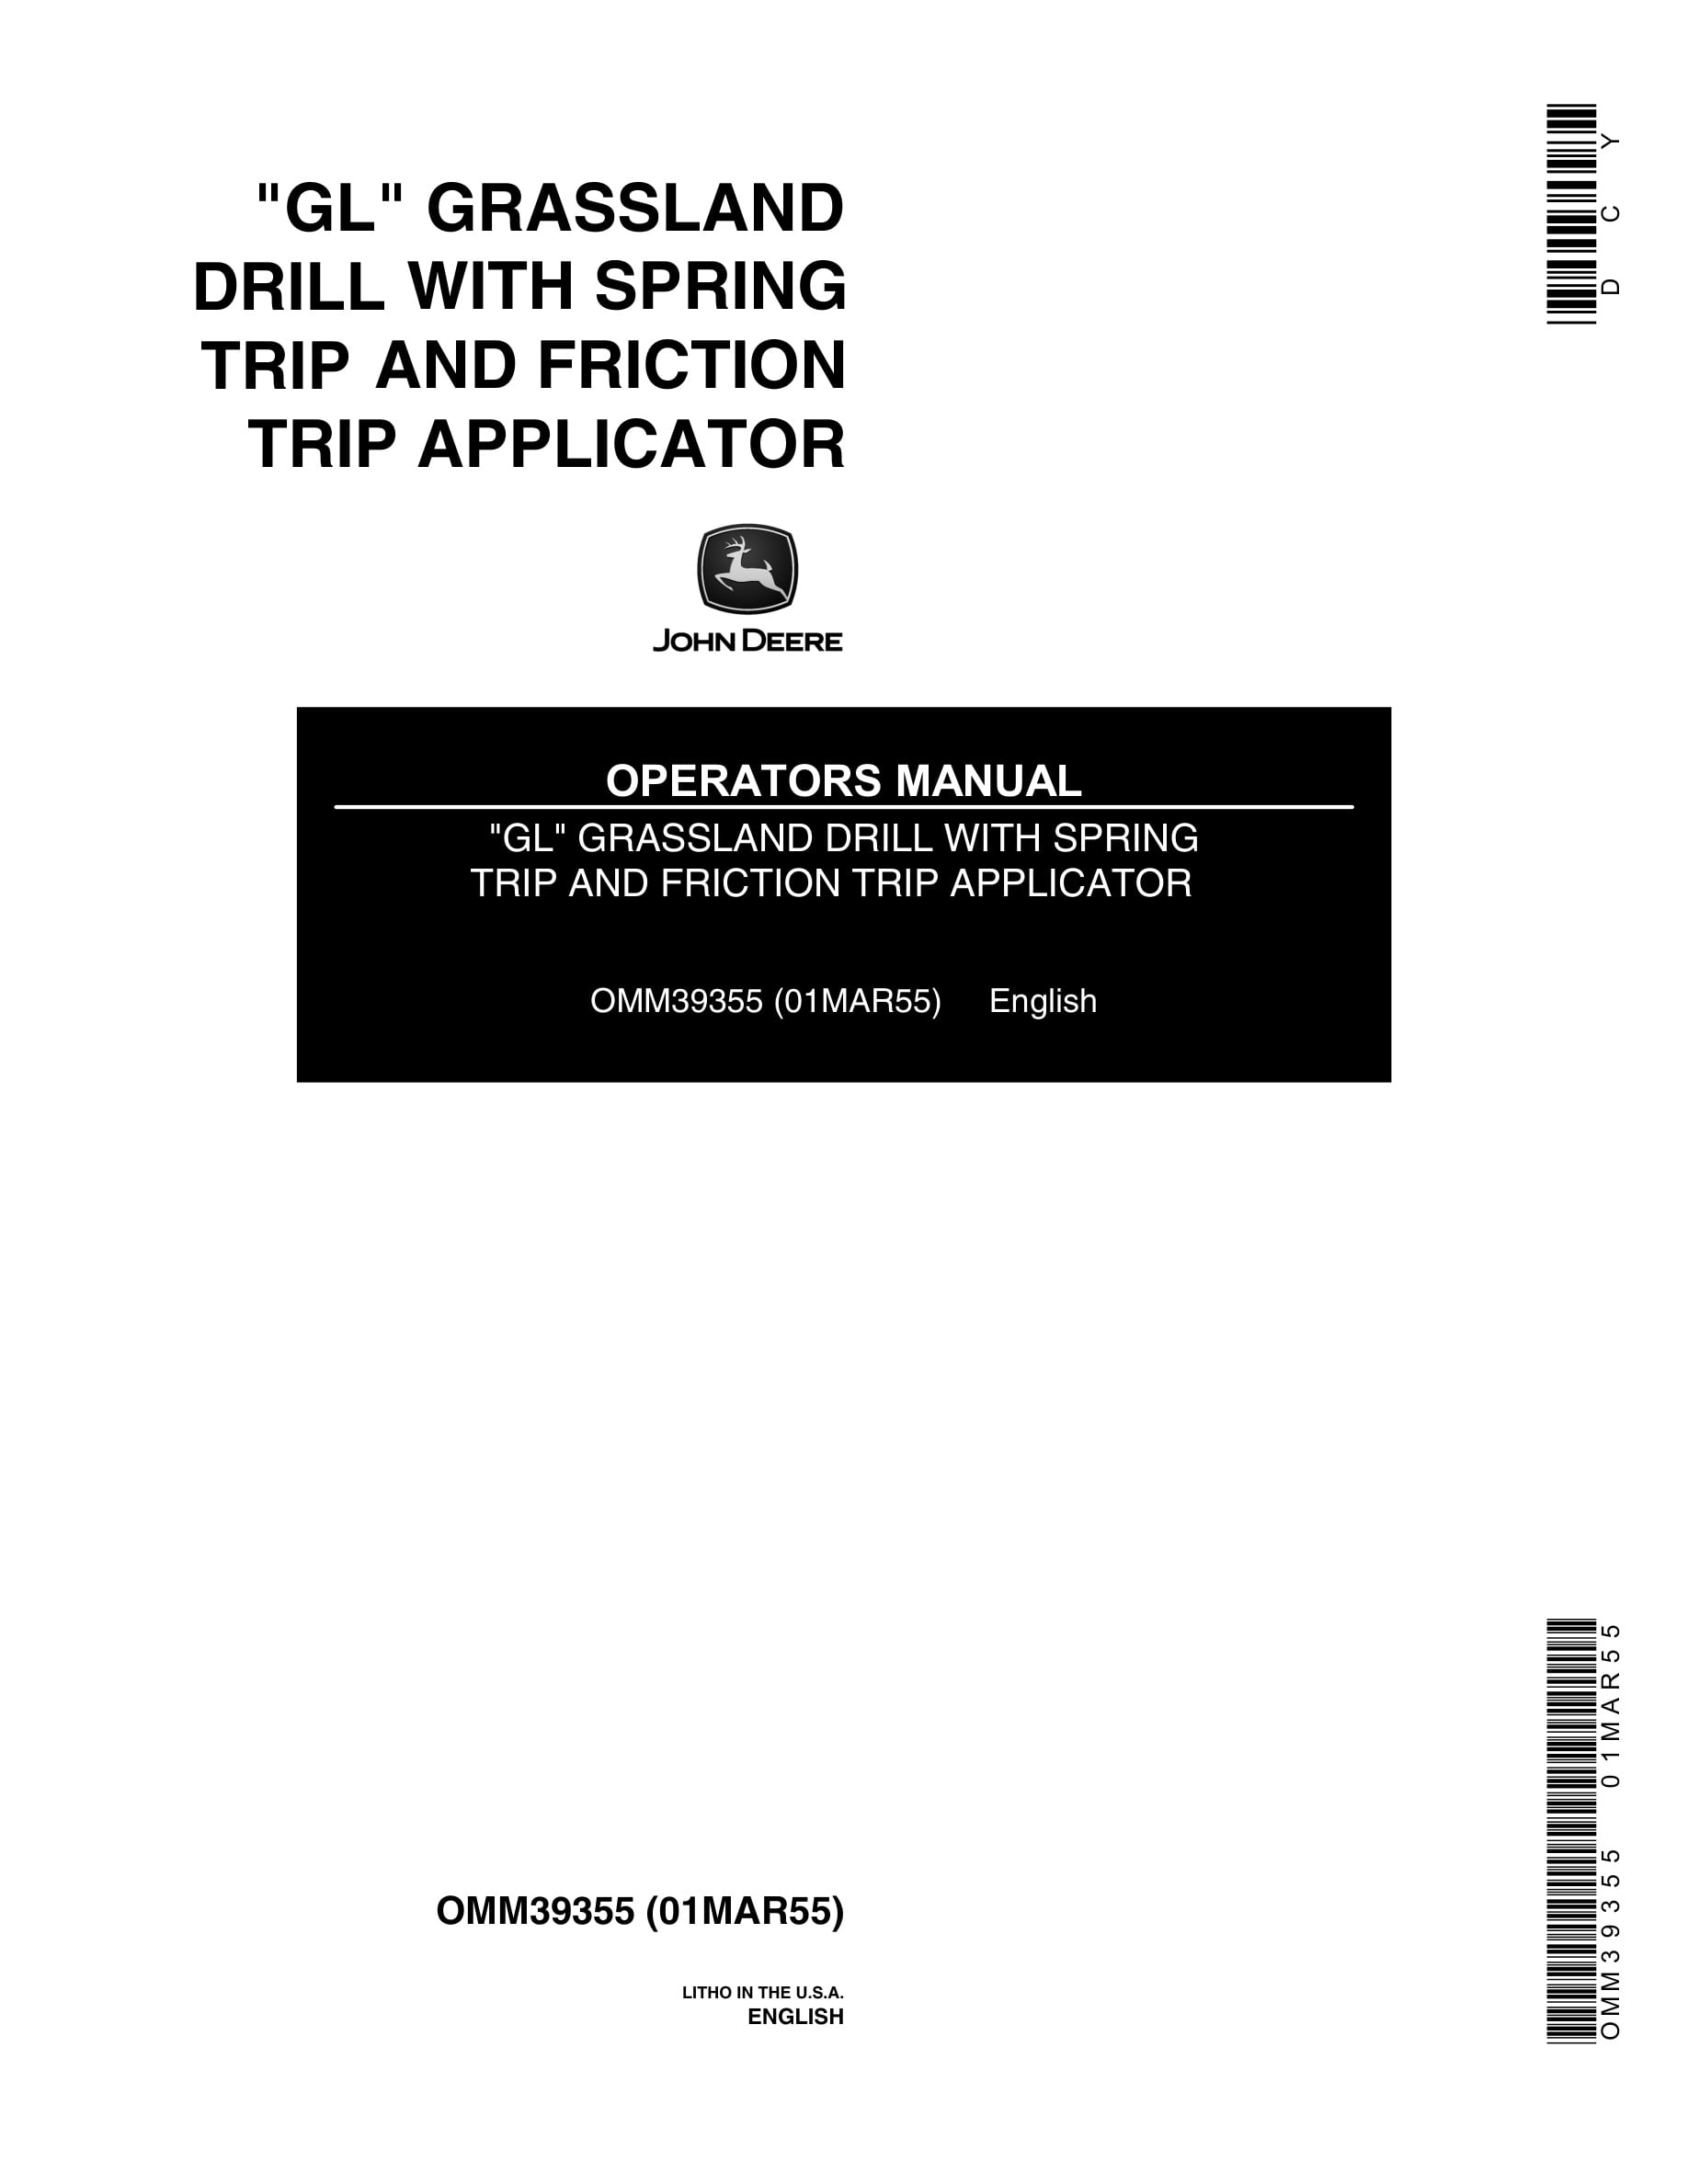 John Deere GL GRASSLAND DRILL WITH SPRING TRIP AND FRICTION TRIP APPLICATOR Operator Manual OMM39355-1